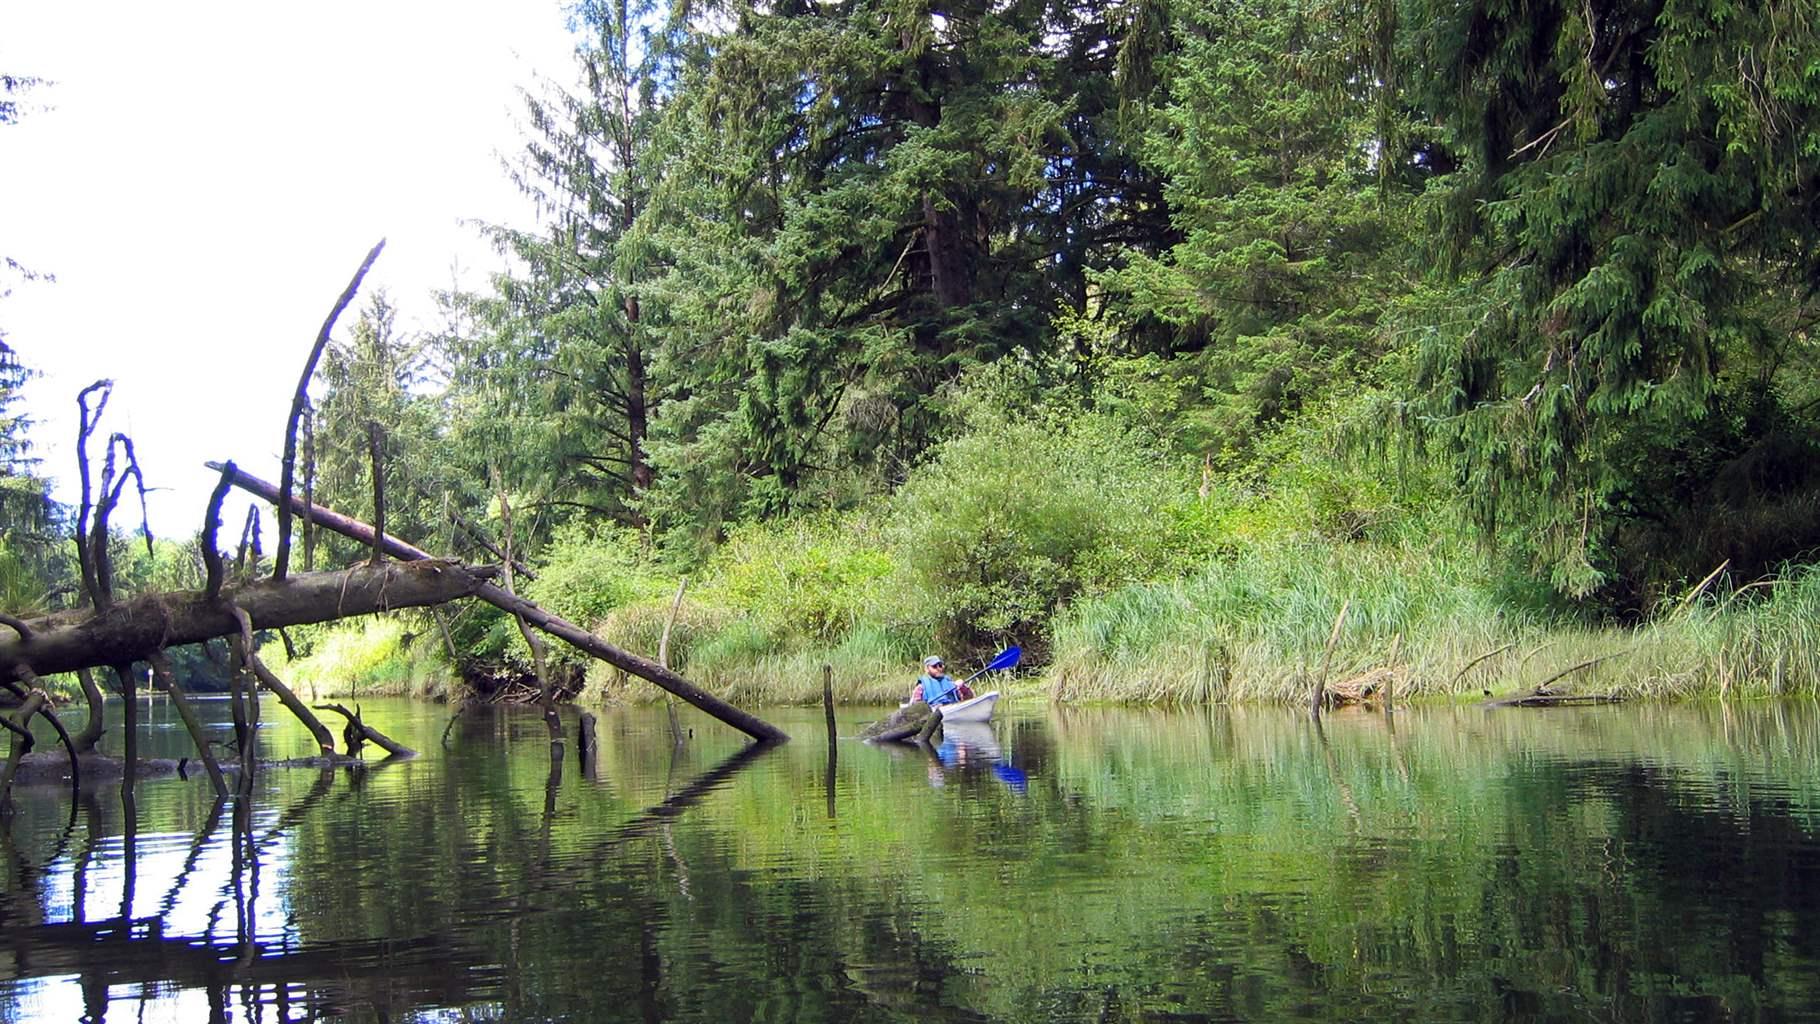 A kayaker enjoys paddling through a tidal swamp in the Nehalem River estuary in Oregon. Dominated by Sitka spruce, this ecosystem is a rich haven for salmon, migratory birds and other wildlife that also captures a substantial amount of carbon.